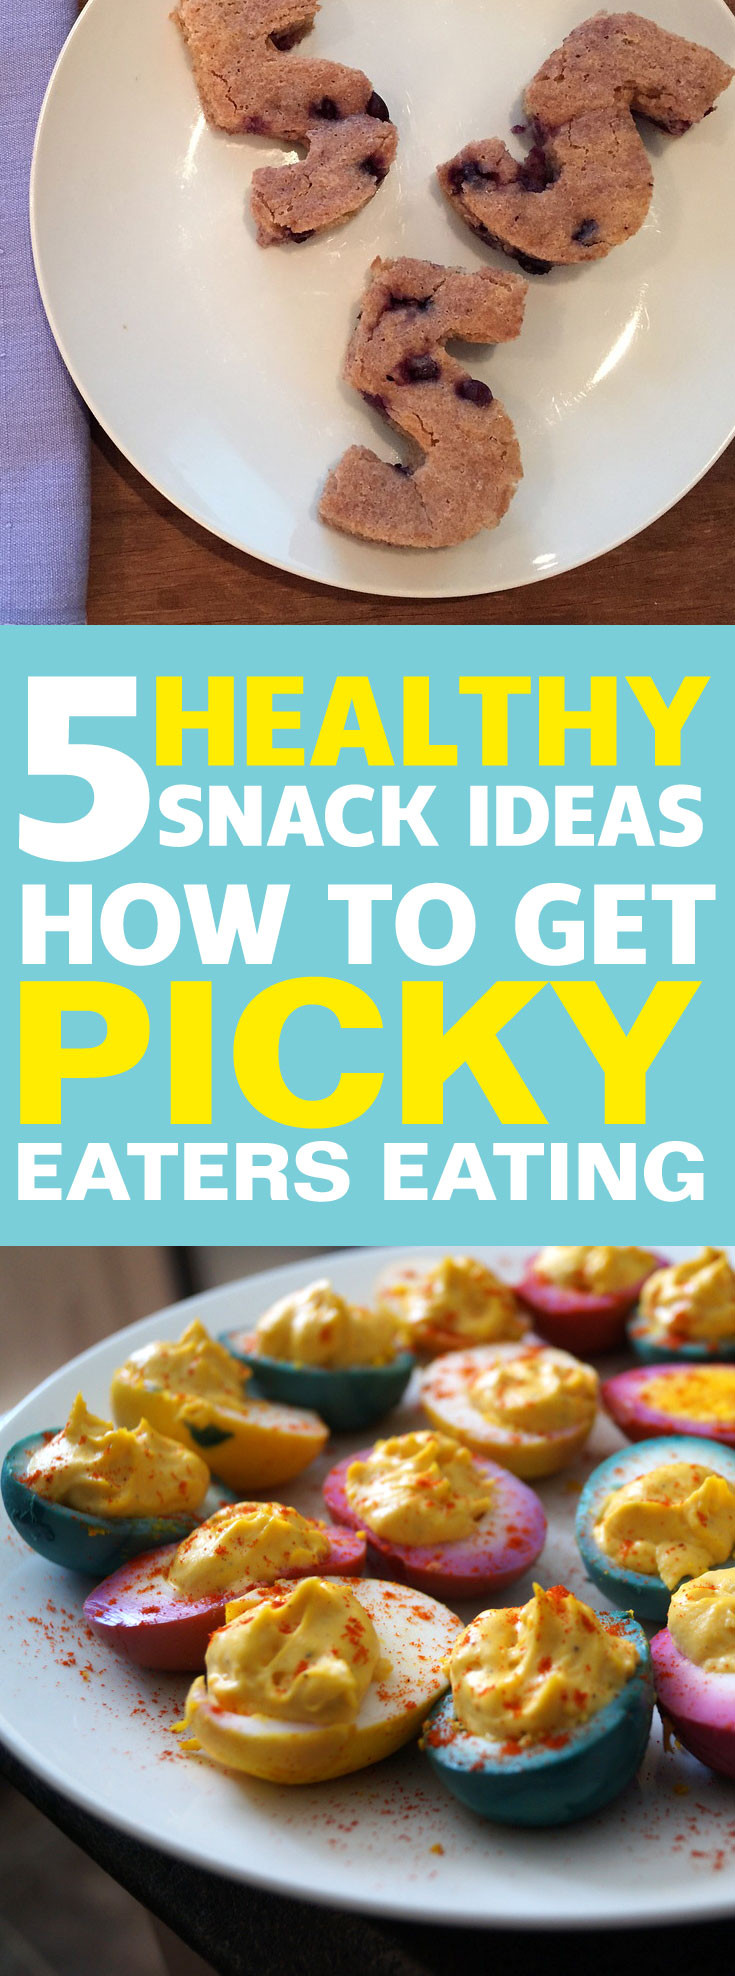 Healthy Snacks For Picky Eaters
 5 Healthy Snacks for Kids How To Get Picky Eaters Eating